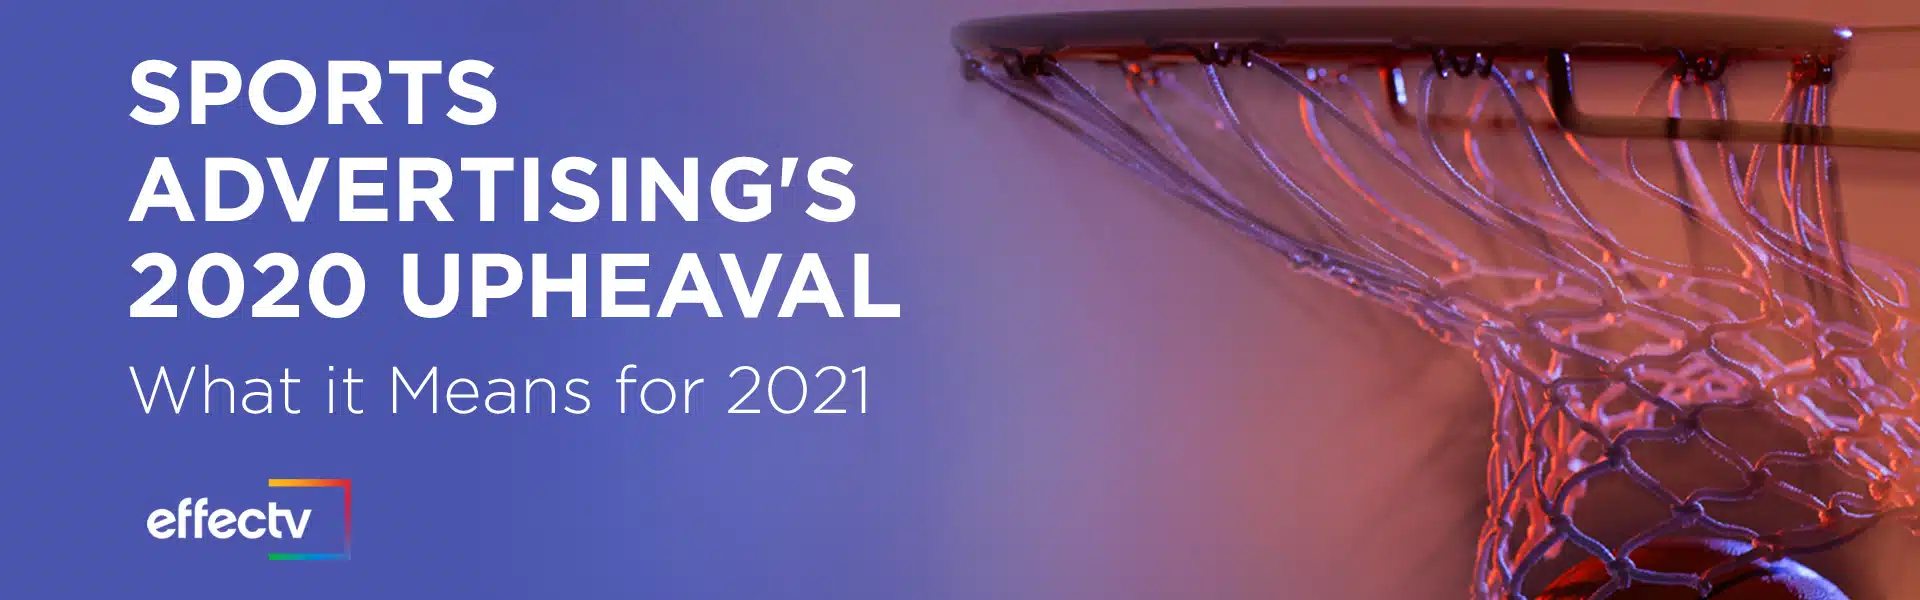 Sports Advertising's 2020 Upheaval: What it Means for 2021 blog header